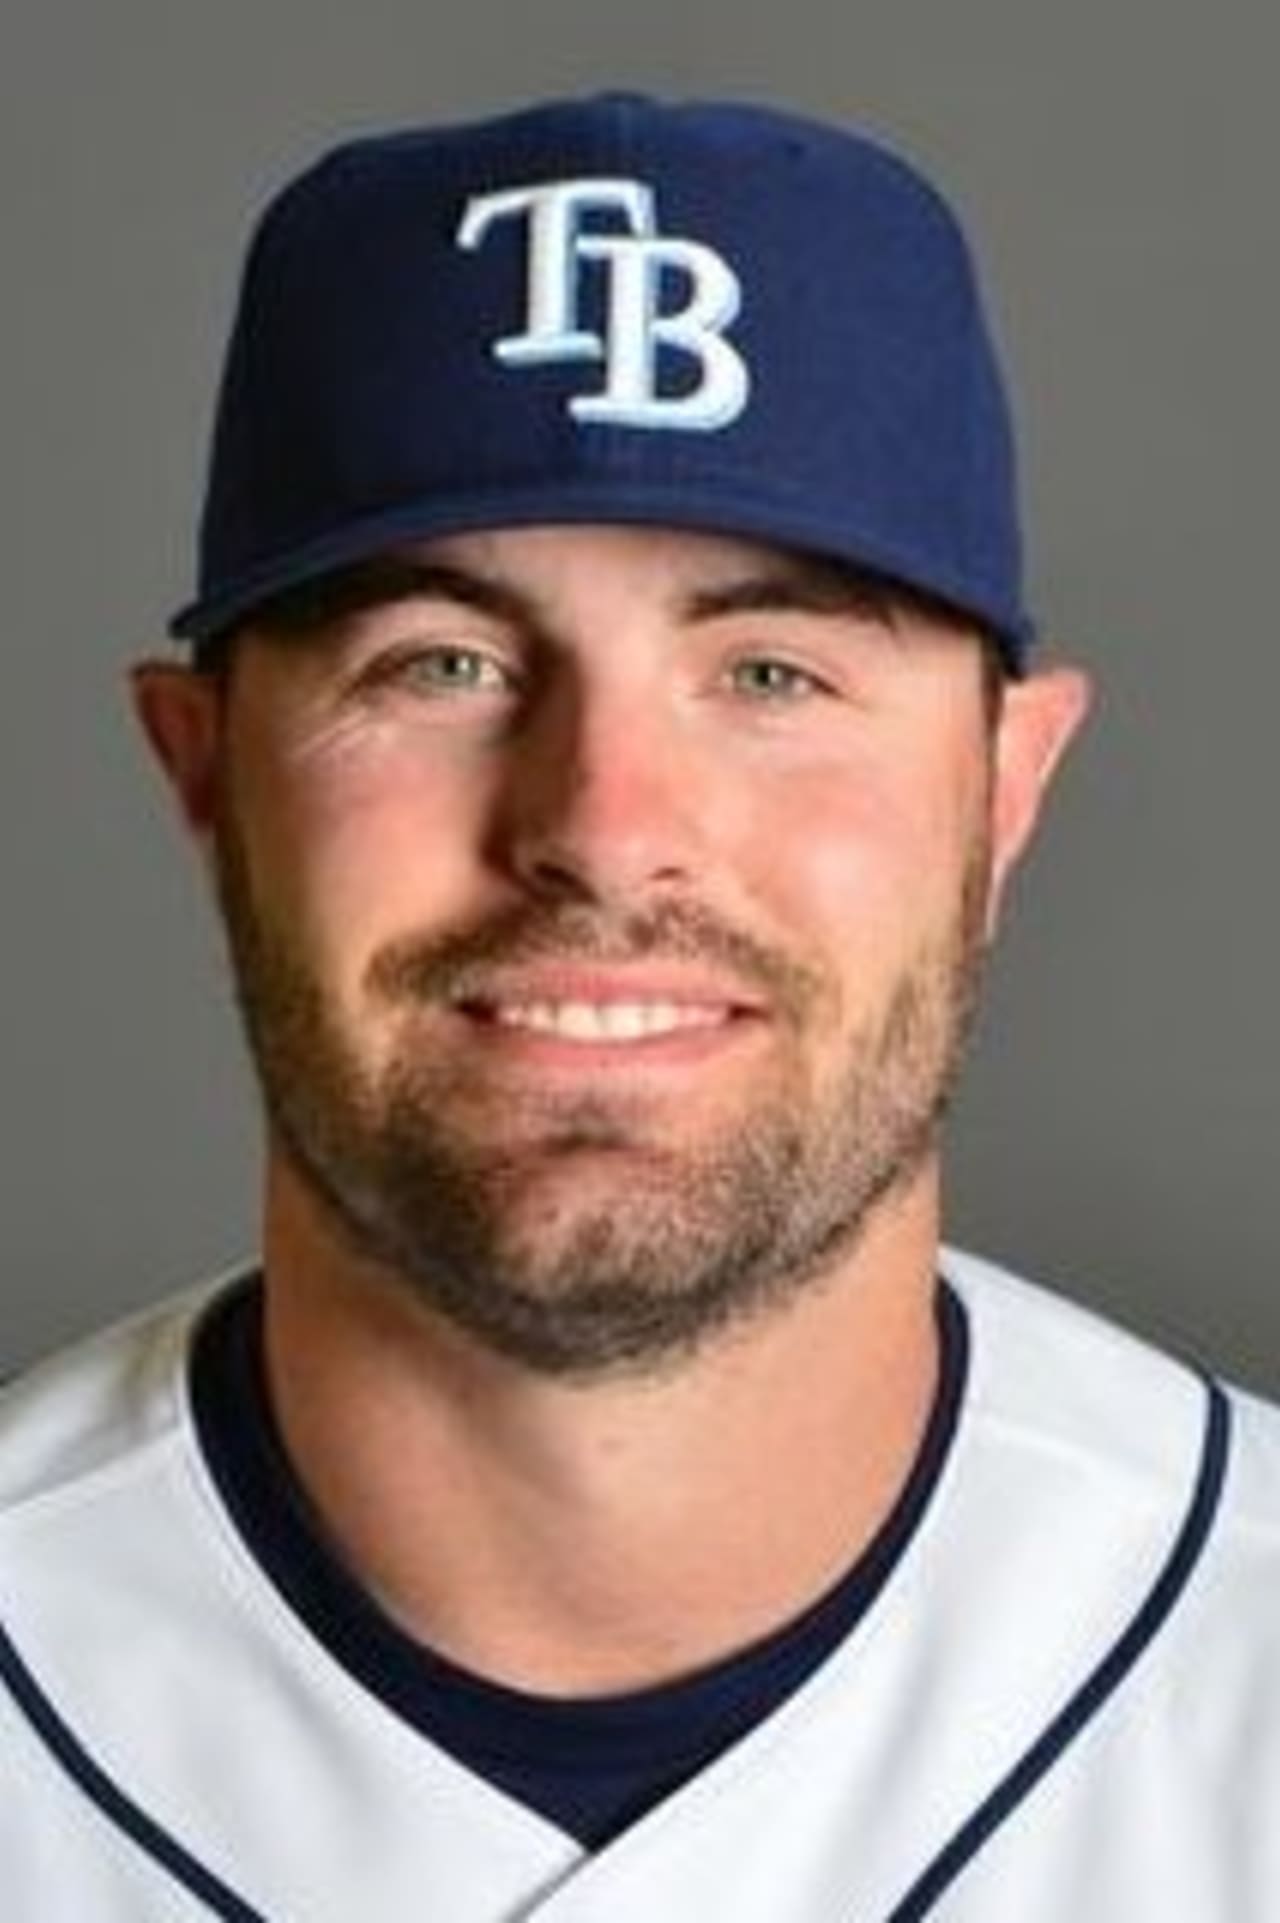 New Canaan's Curt Casali was promoted to the major leagues Thursday by the Tampa Bay Rays. 